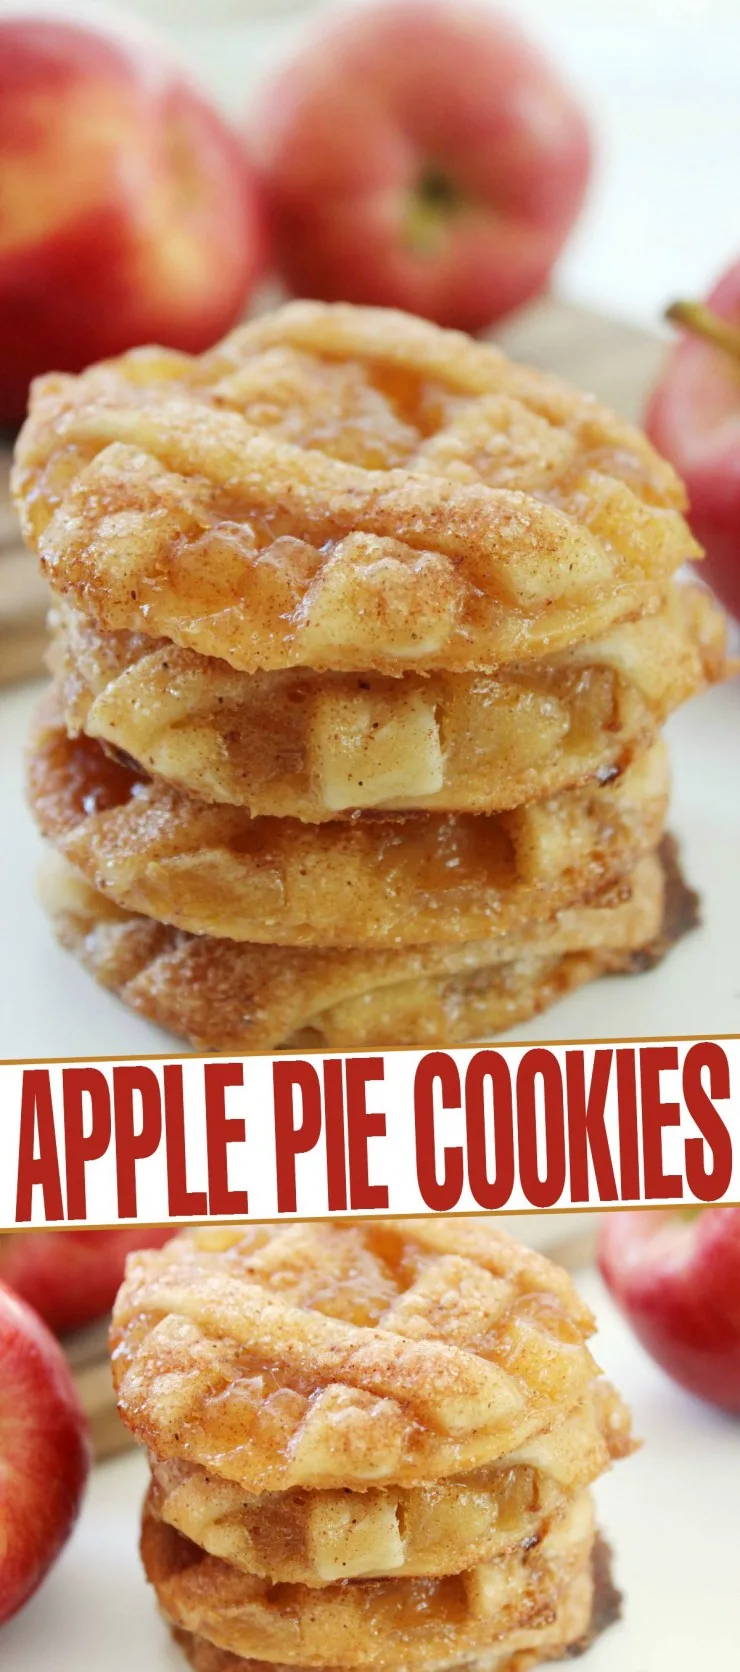 These apple pie cookies are a bite size dessert with all the flavour of apple pie!